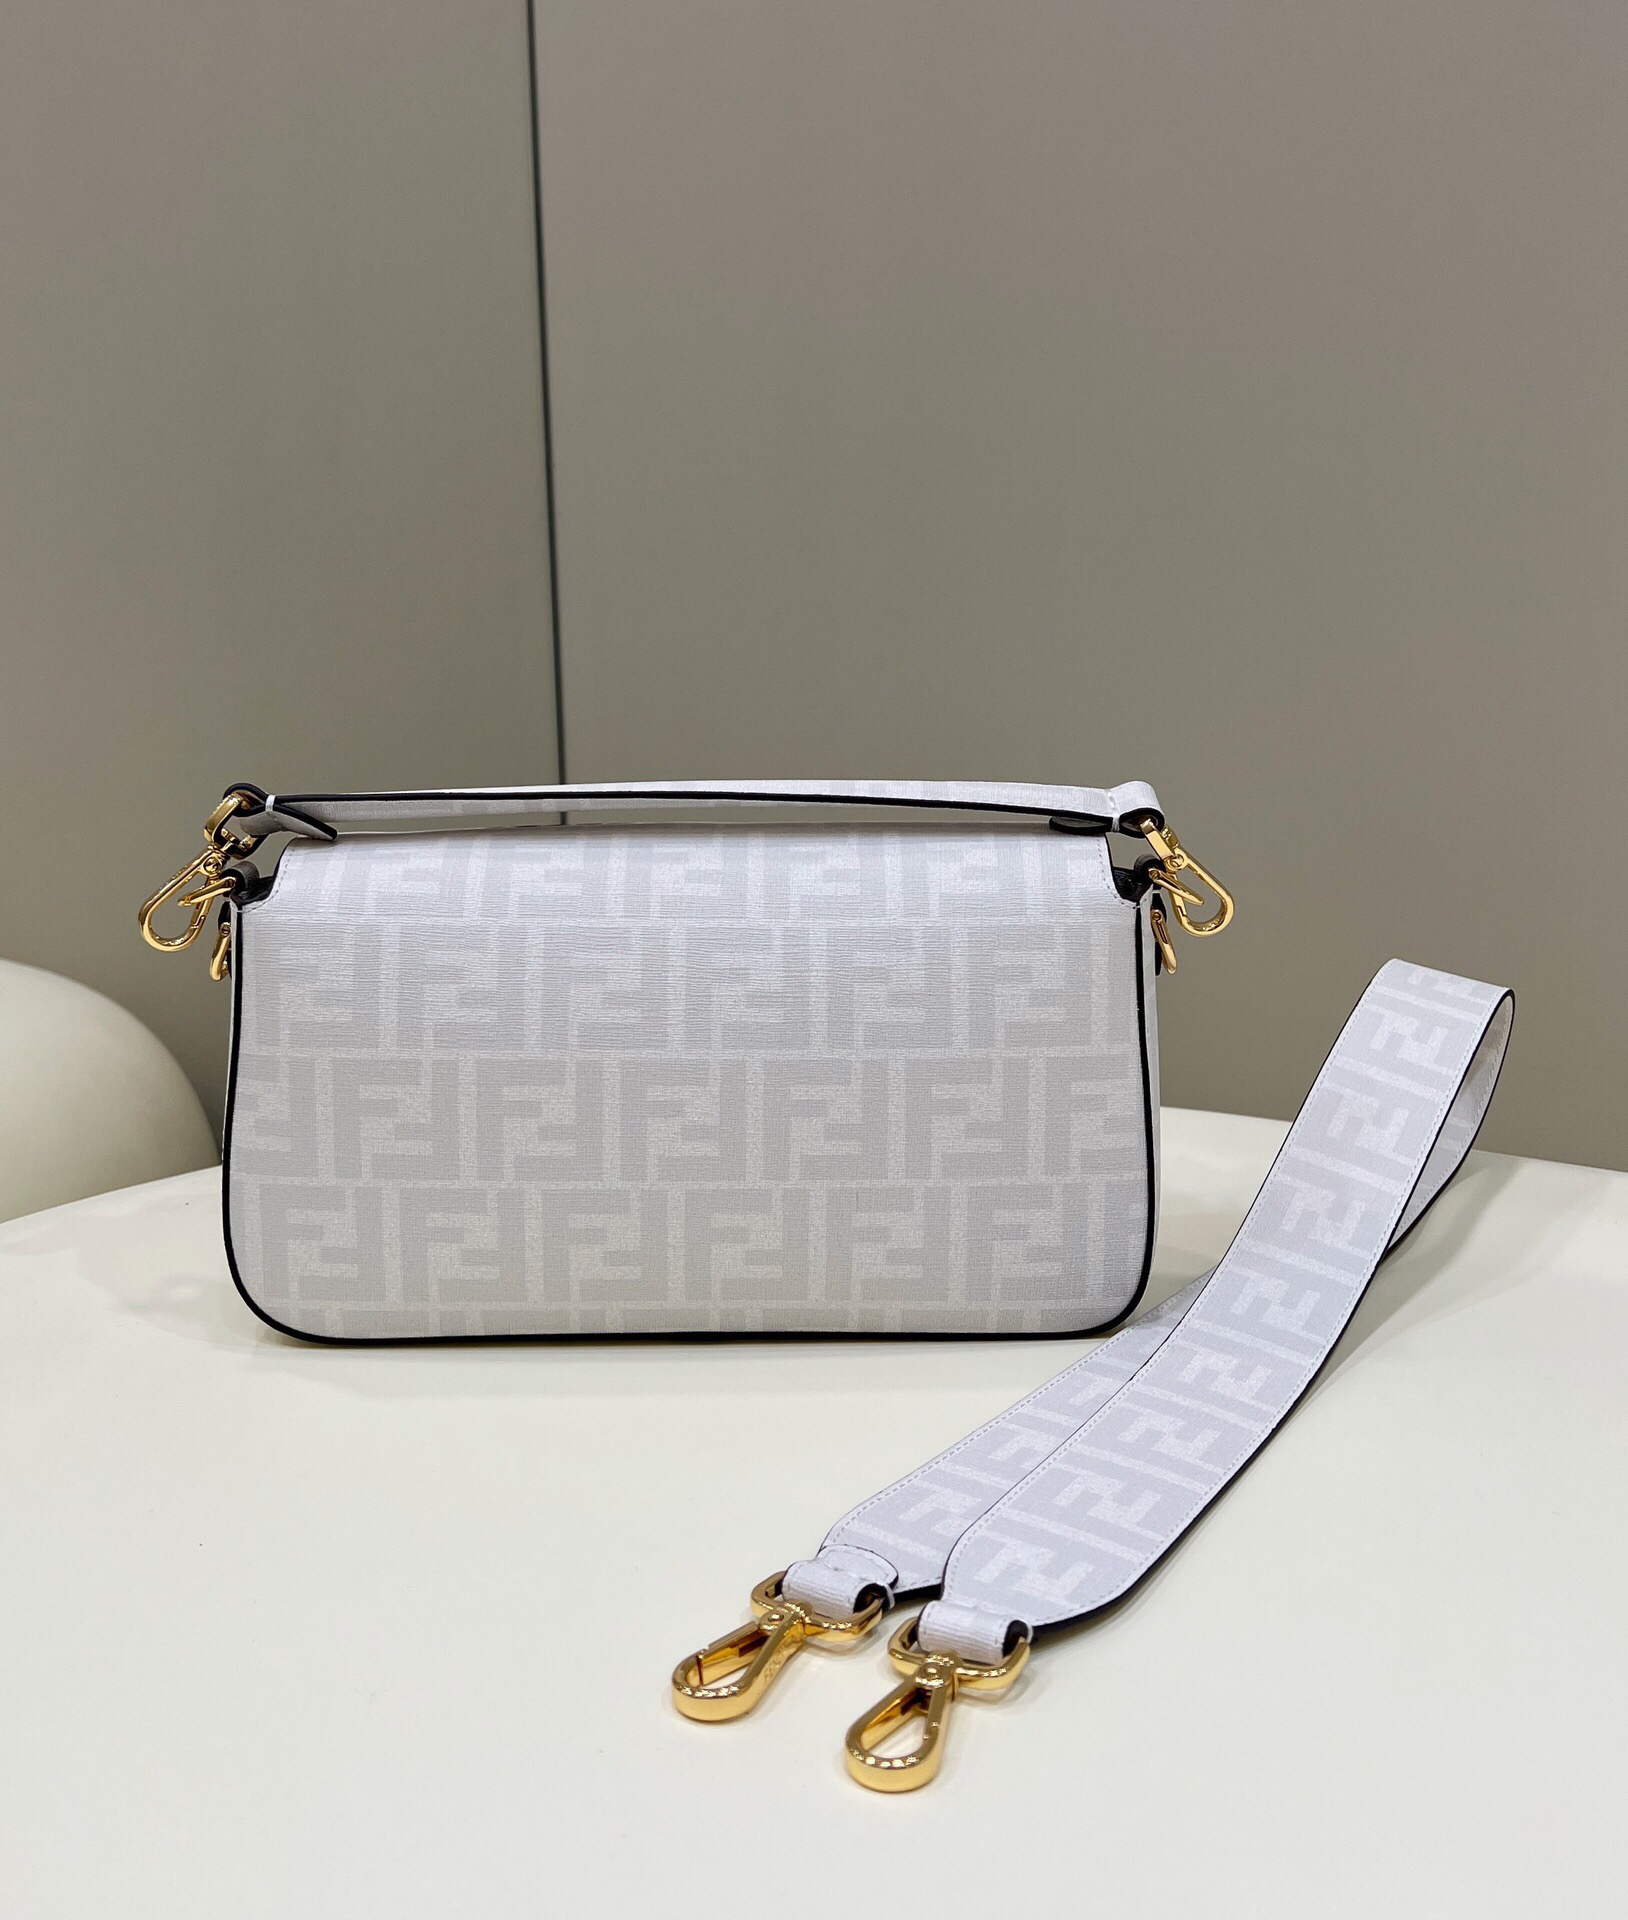 fendi-8br600-baguette-ff-white-glazed-fabric-bag-with-inlay-003-luxibags.ru